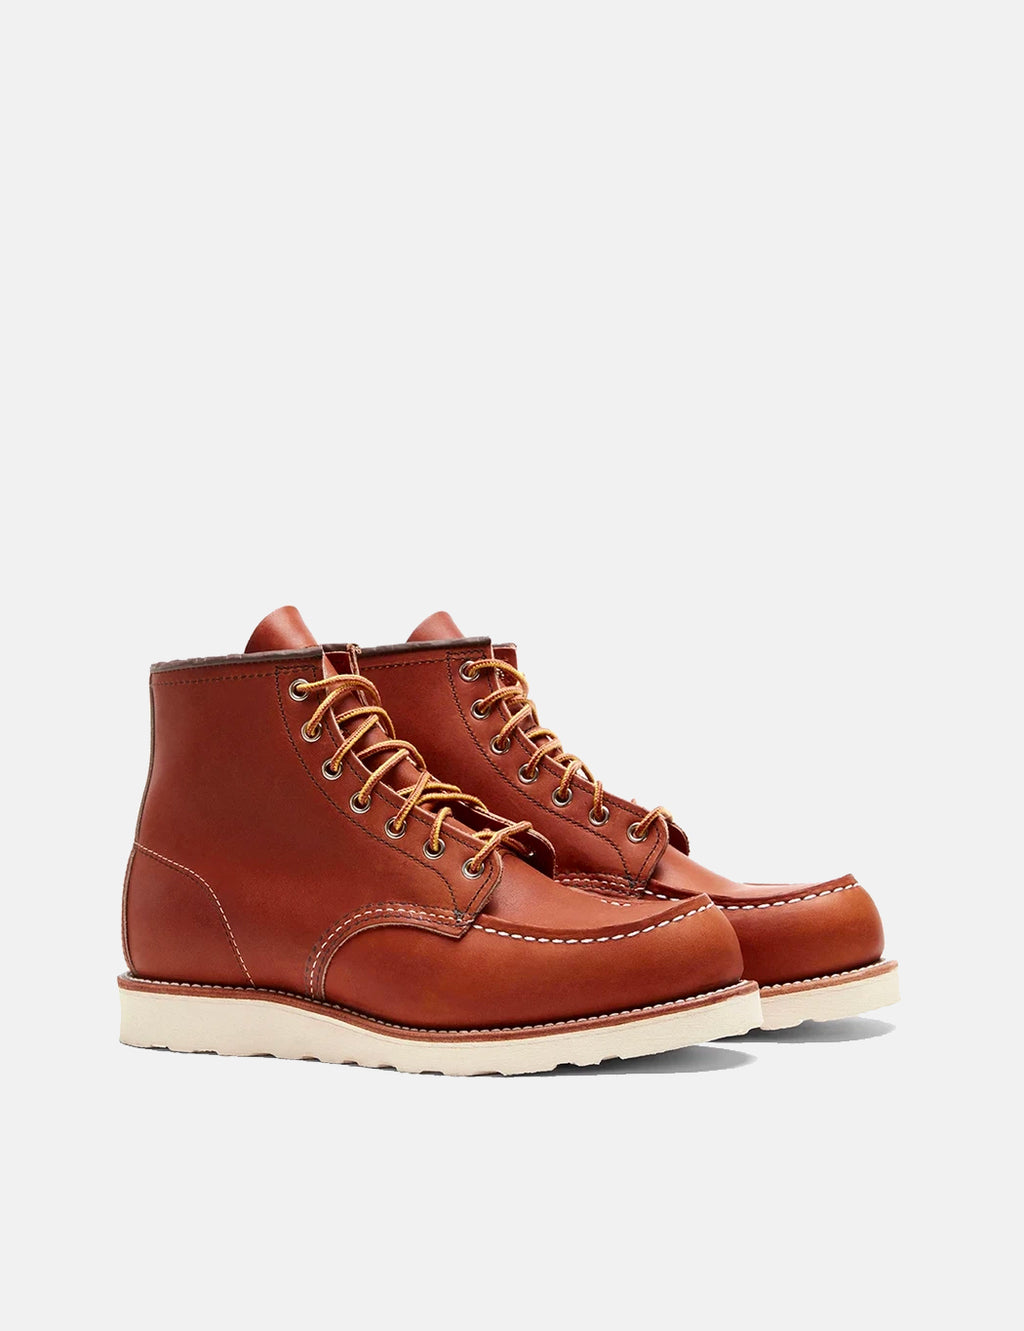 red wing boots official site